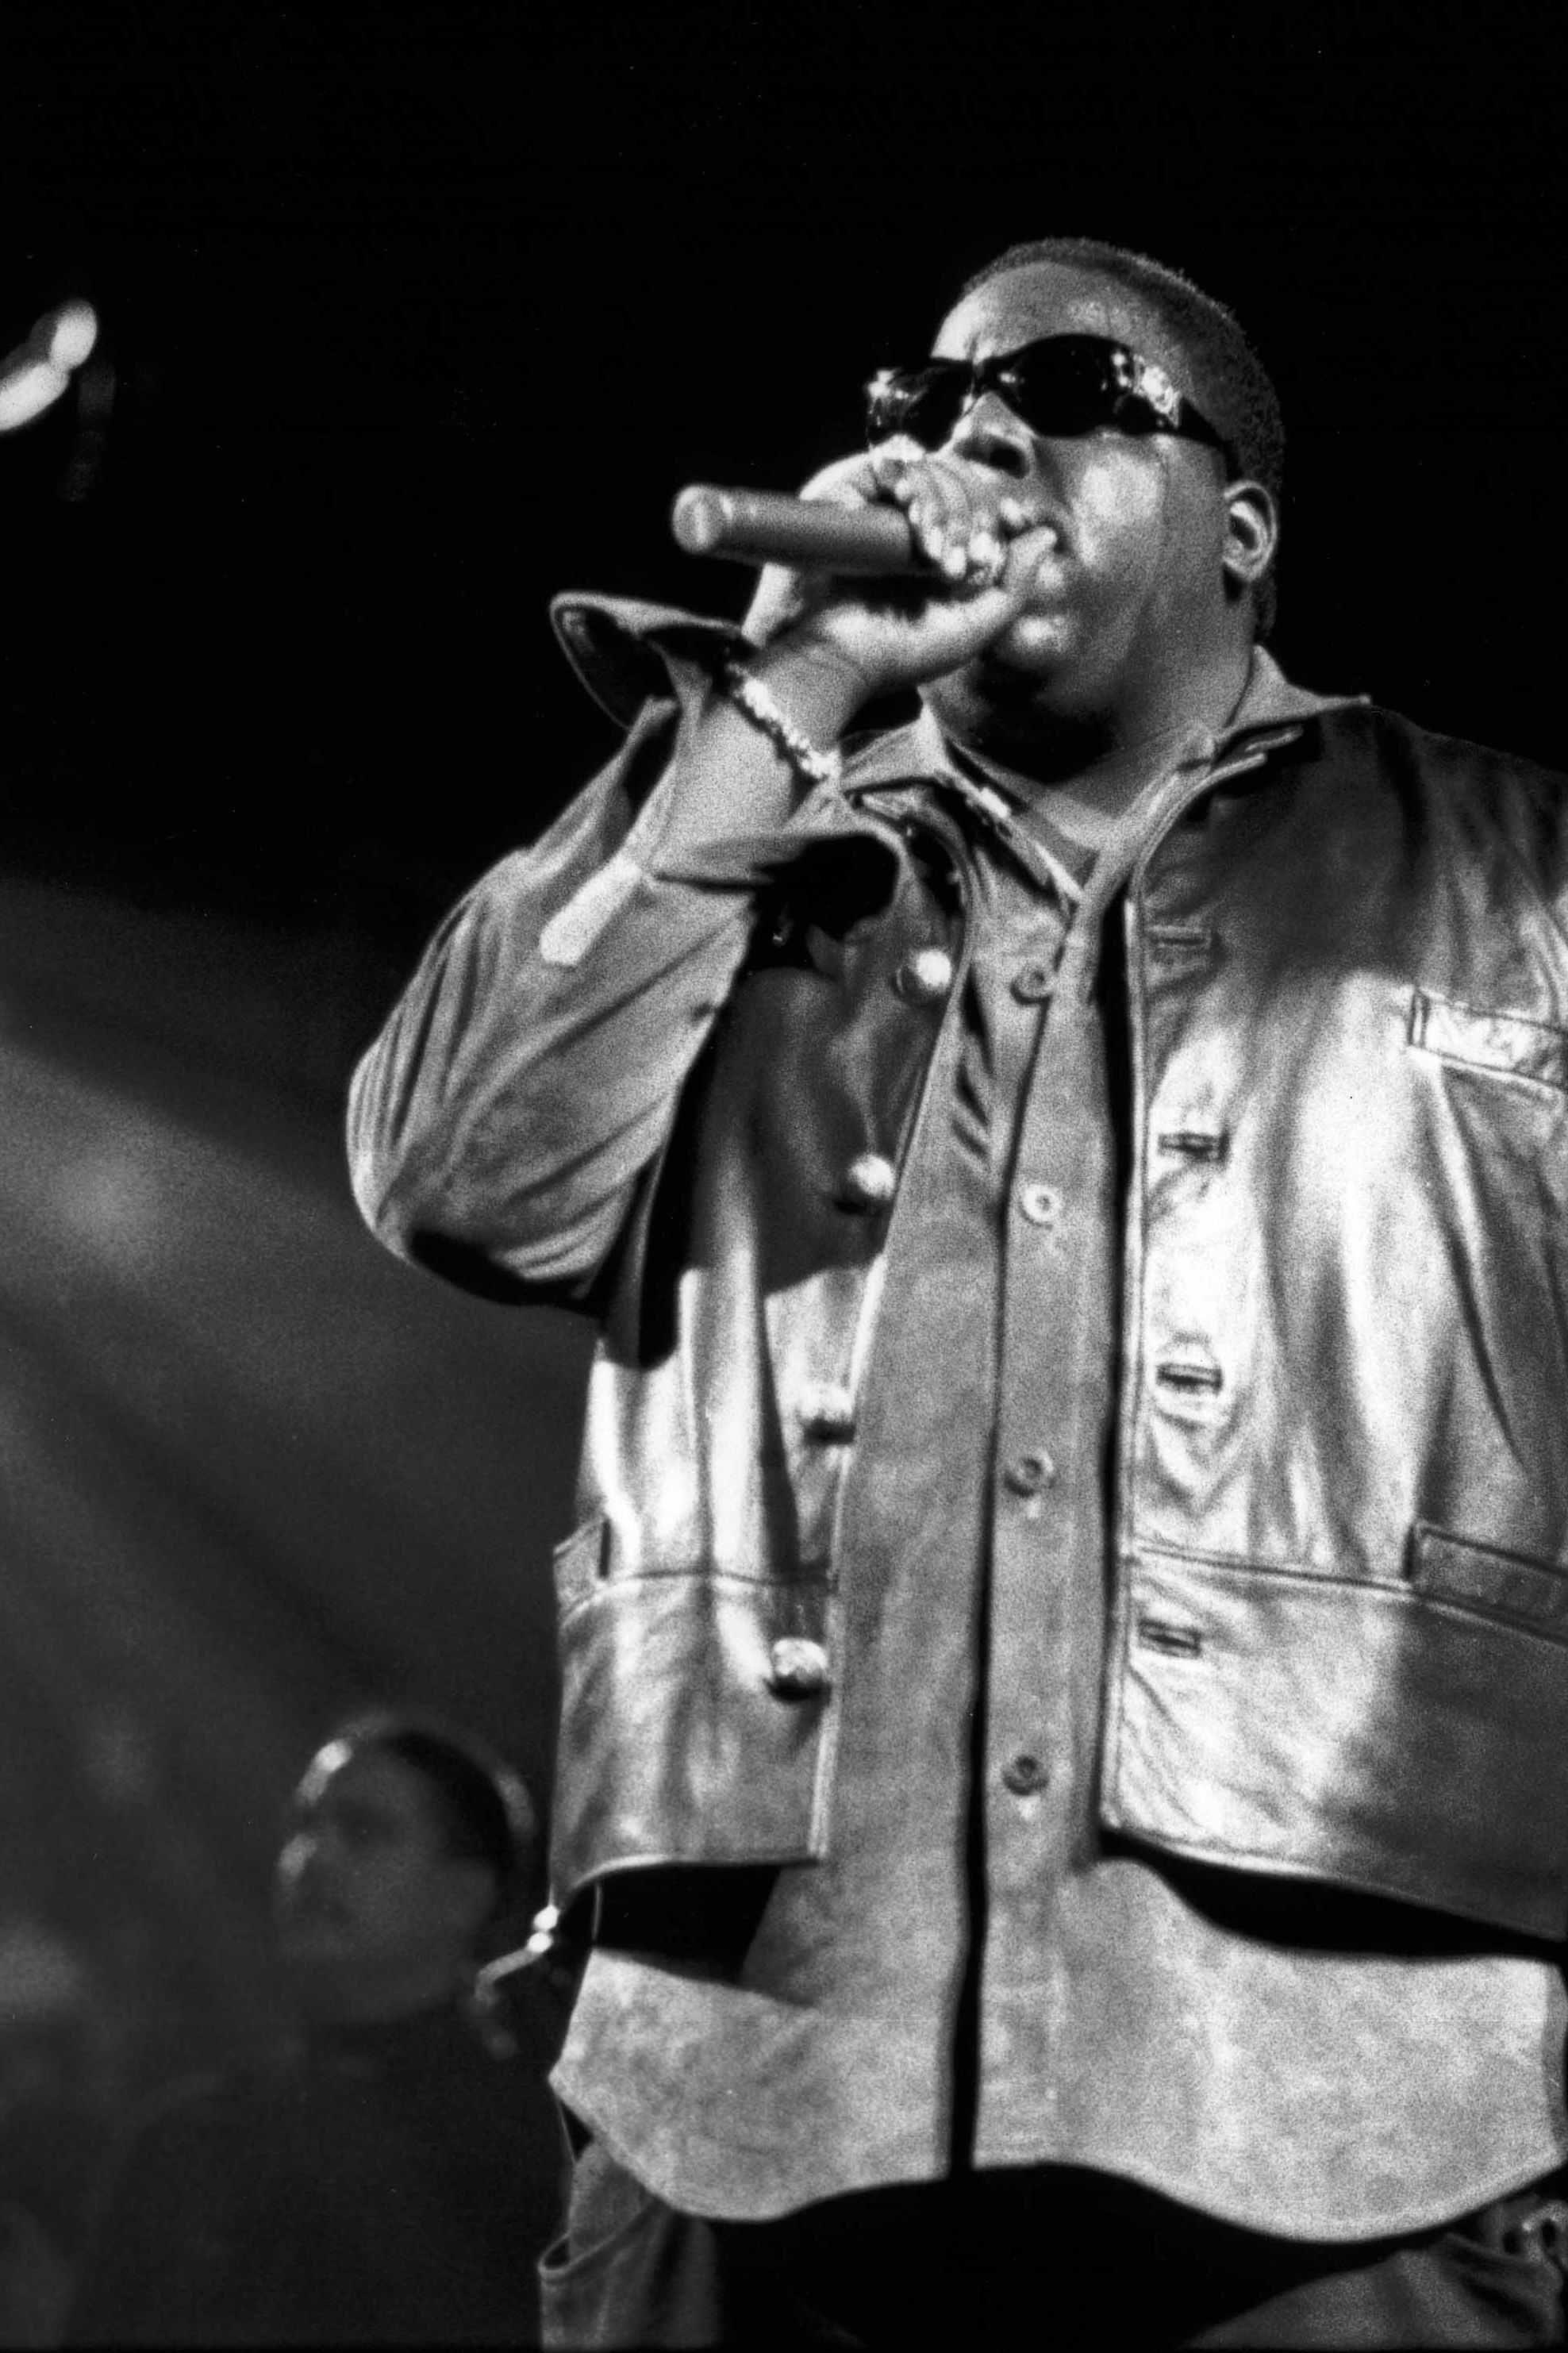 Celebrating the life of Notorious B.I.G., Brooklyn-style | CNN